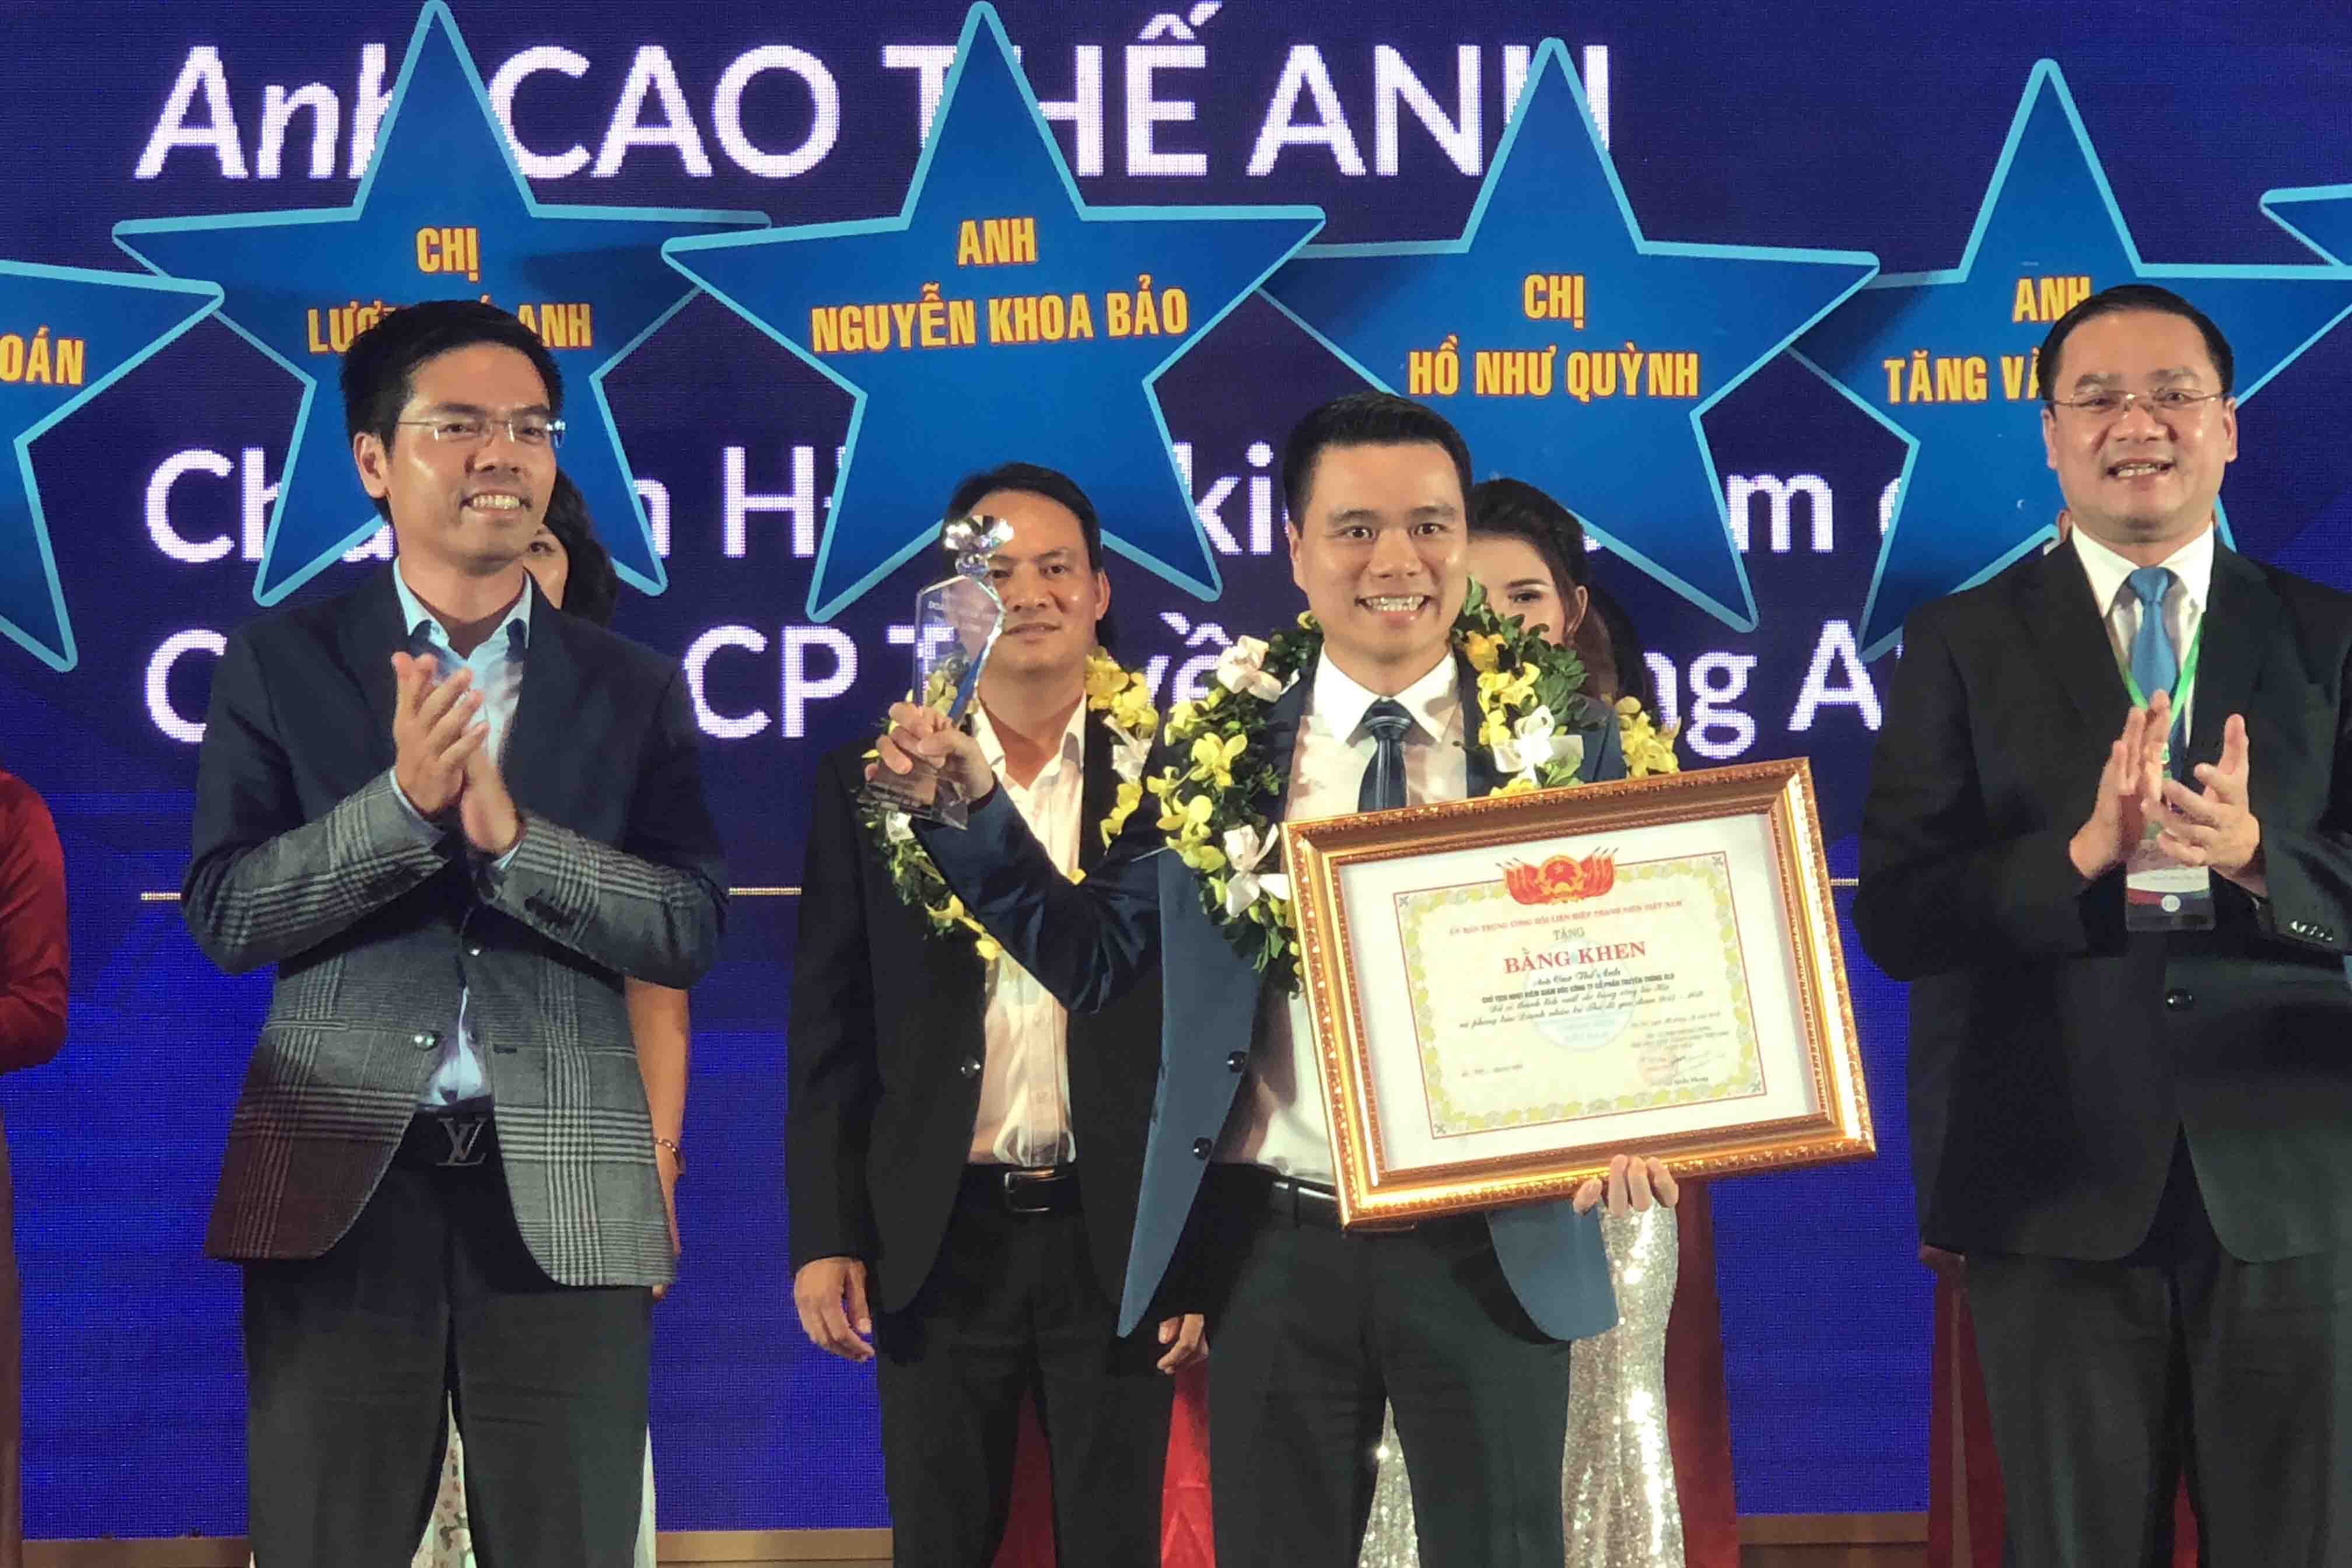 CEO ALO Media – Hanoi young entrepreneurs are not afraid to compete fairly